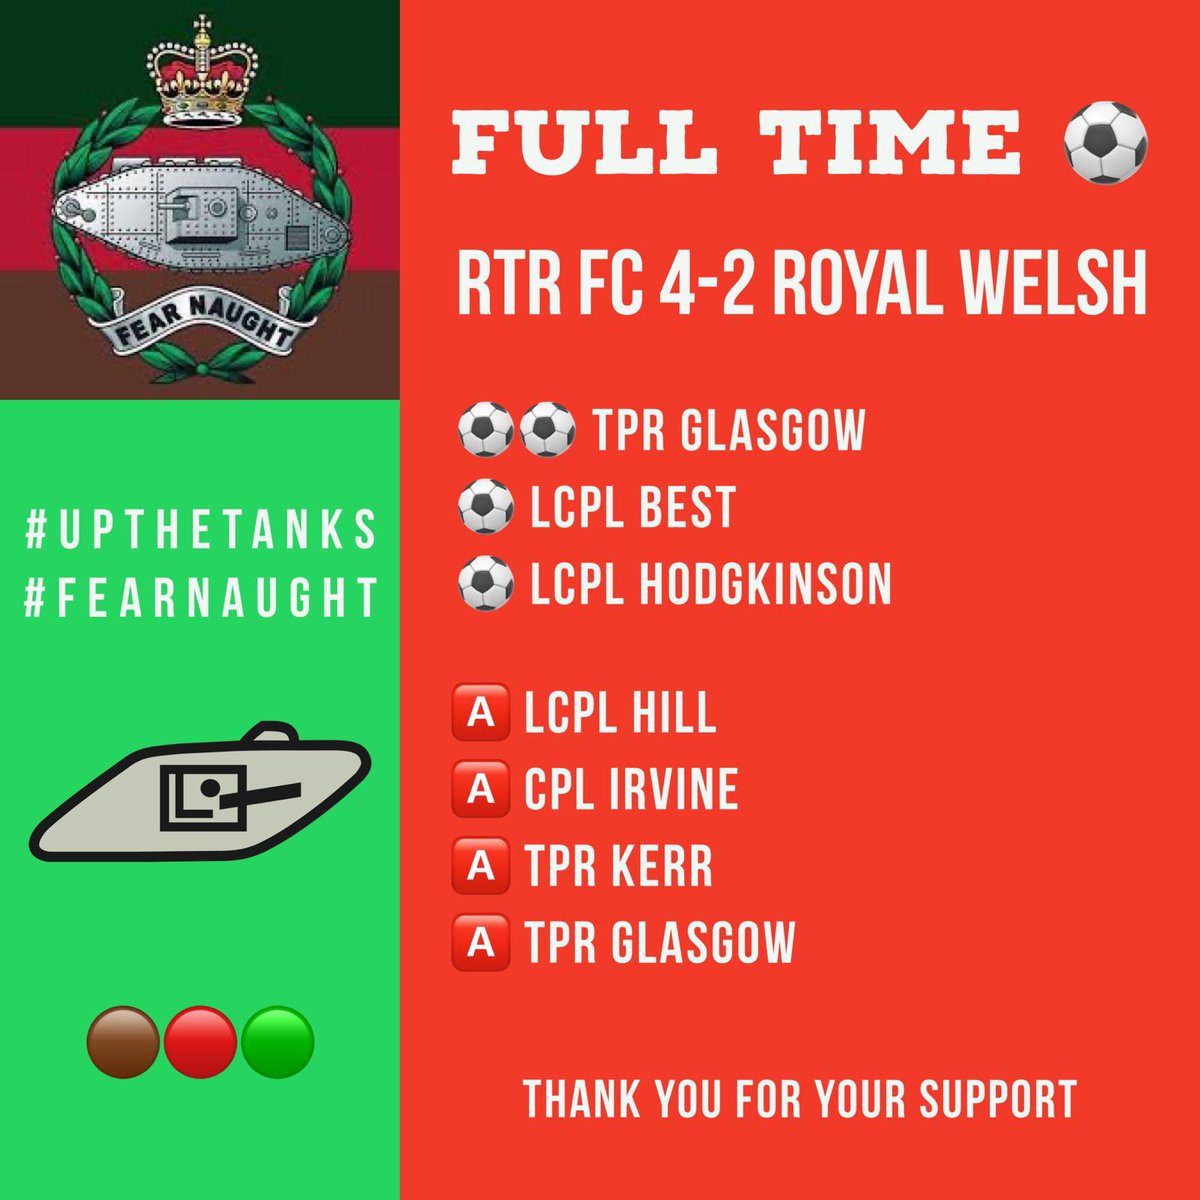 🚨 | Full Time.. 

Another good result keeps us rolling over. Army Cup Semi final next week!

#FearNaught #UpTheTanks